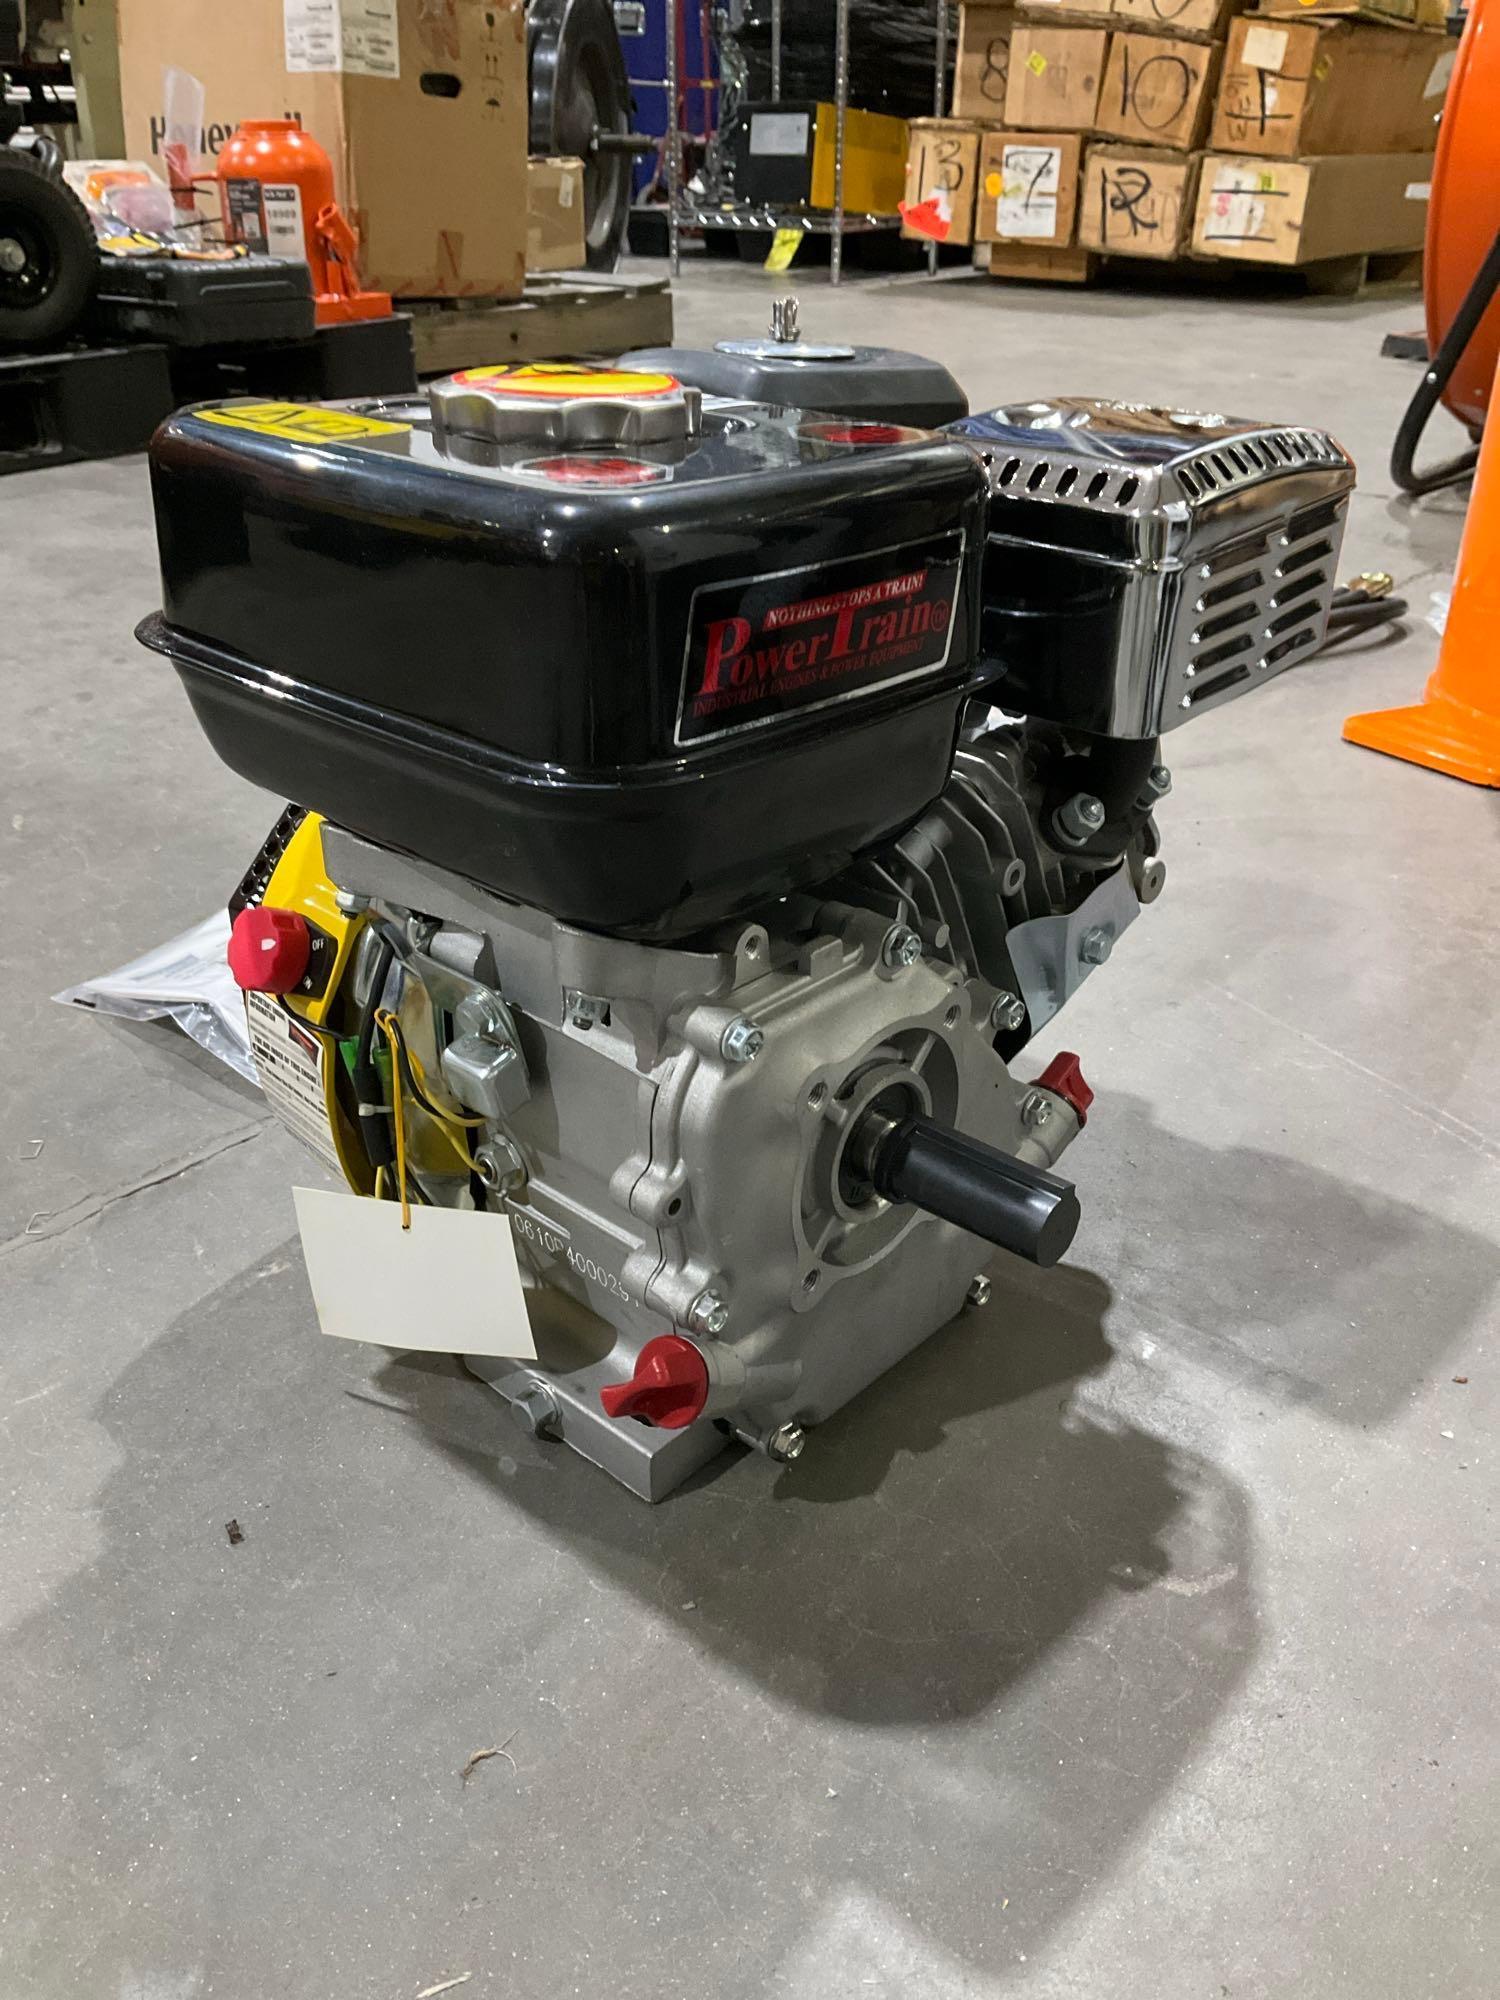 UNUSED POWERTRAIN...PT400 ENGINE, OWNERS MANUAL INCLUDED...